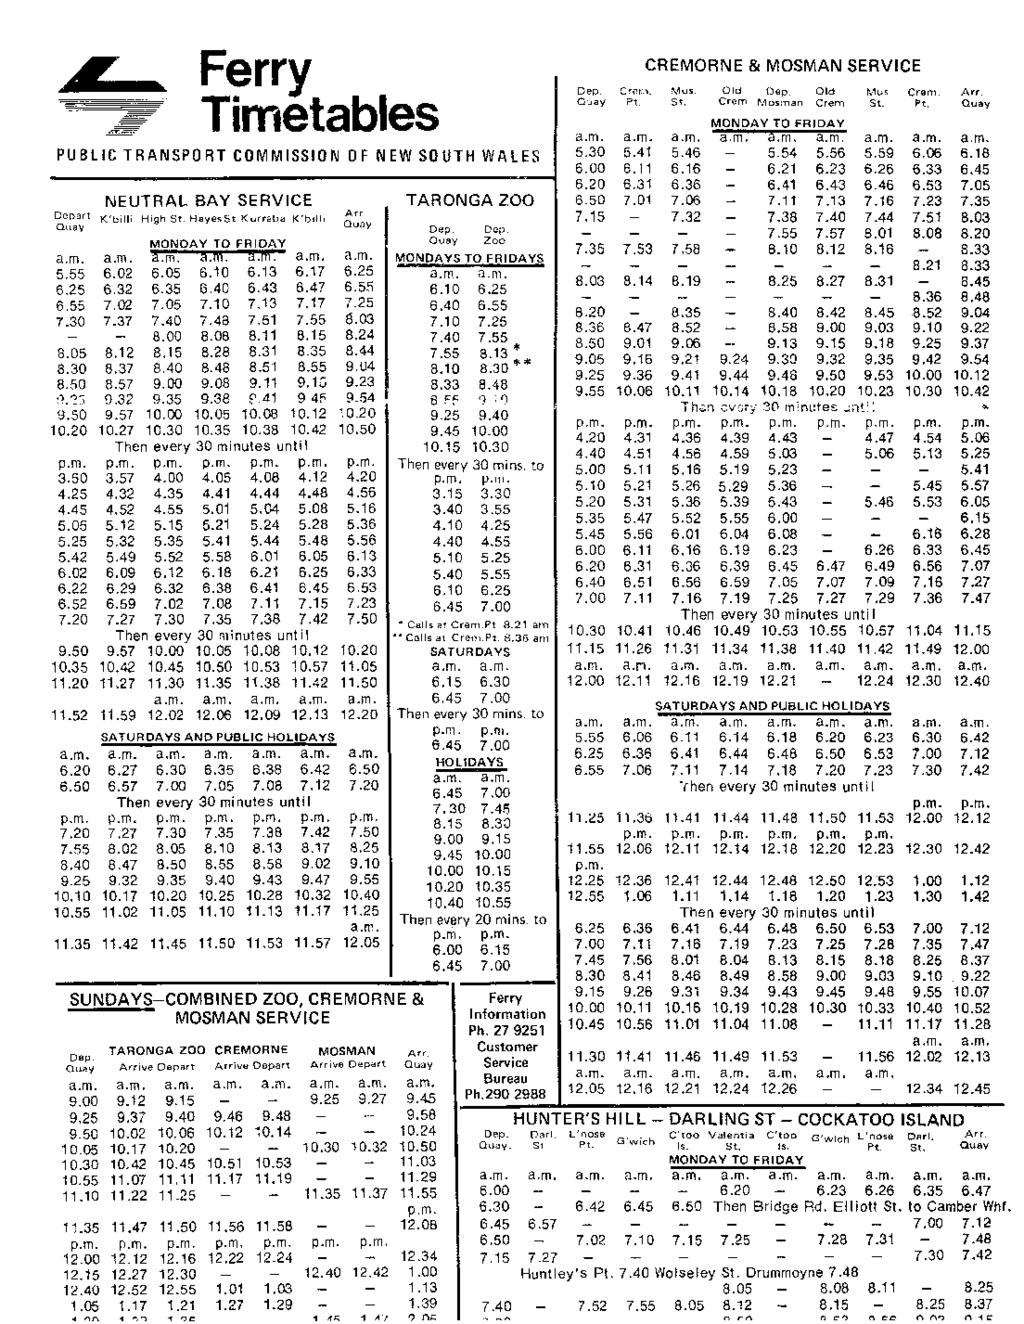 NSWPTC Ferry Timetables, 1975 Supplied